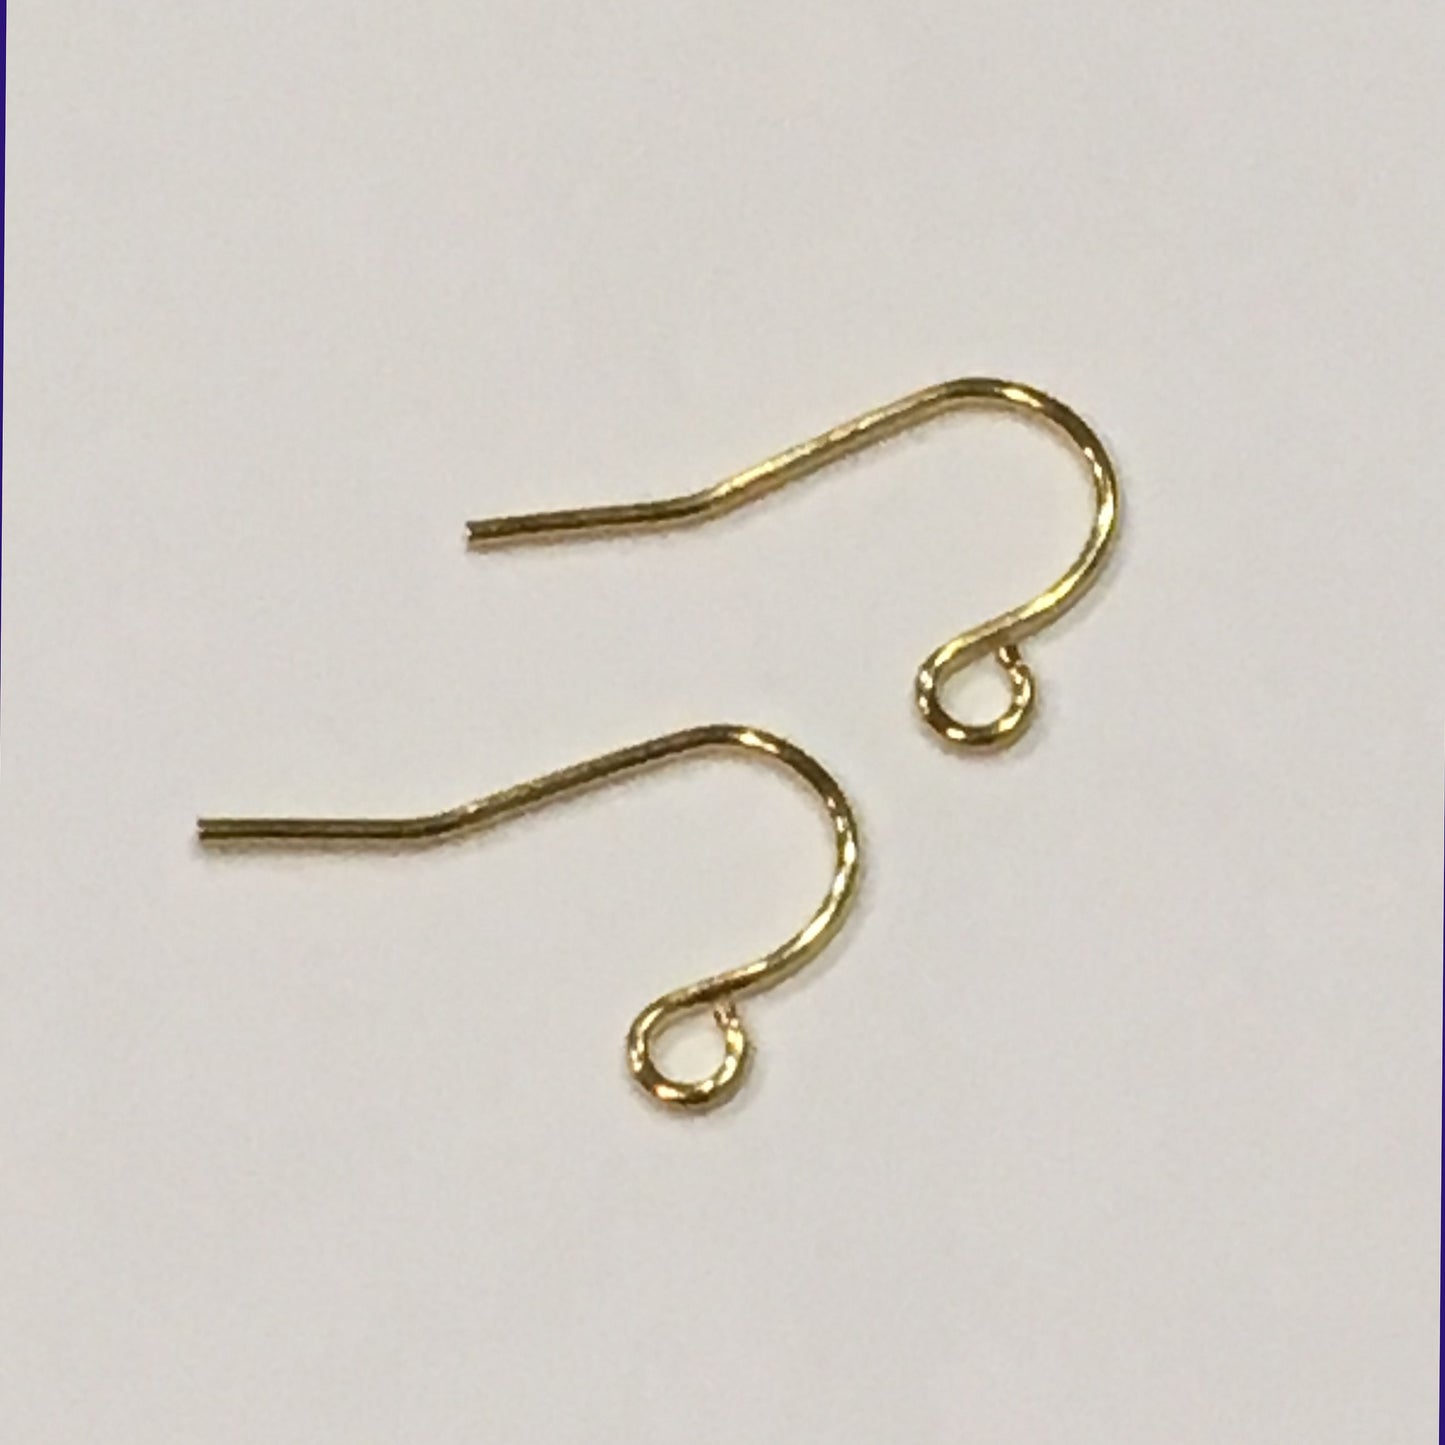 21-Gauge 11 mm Gold French Fish Hook Ear Wires - 1 Pair